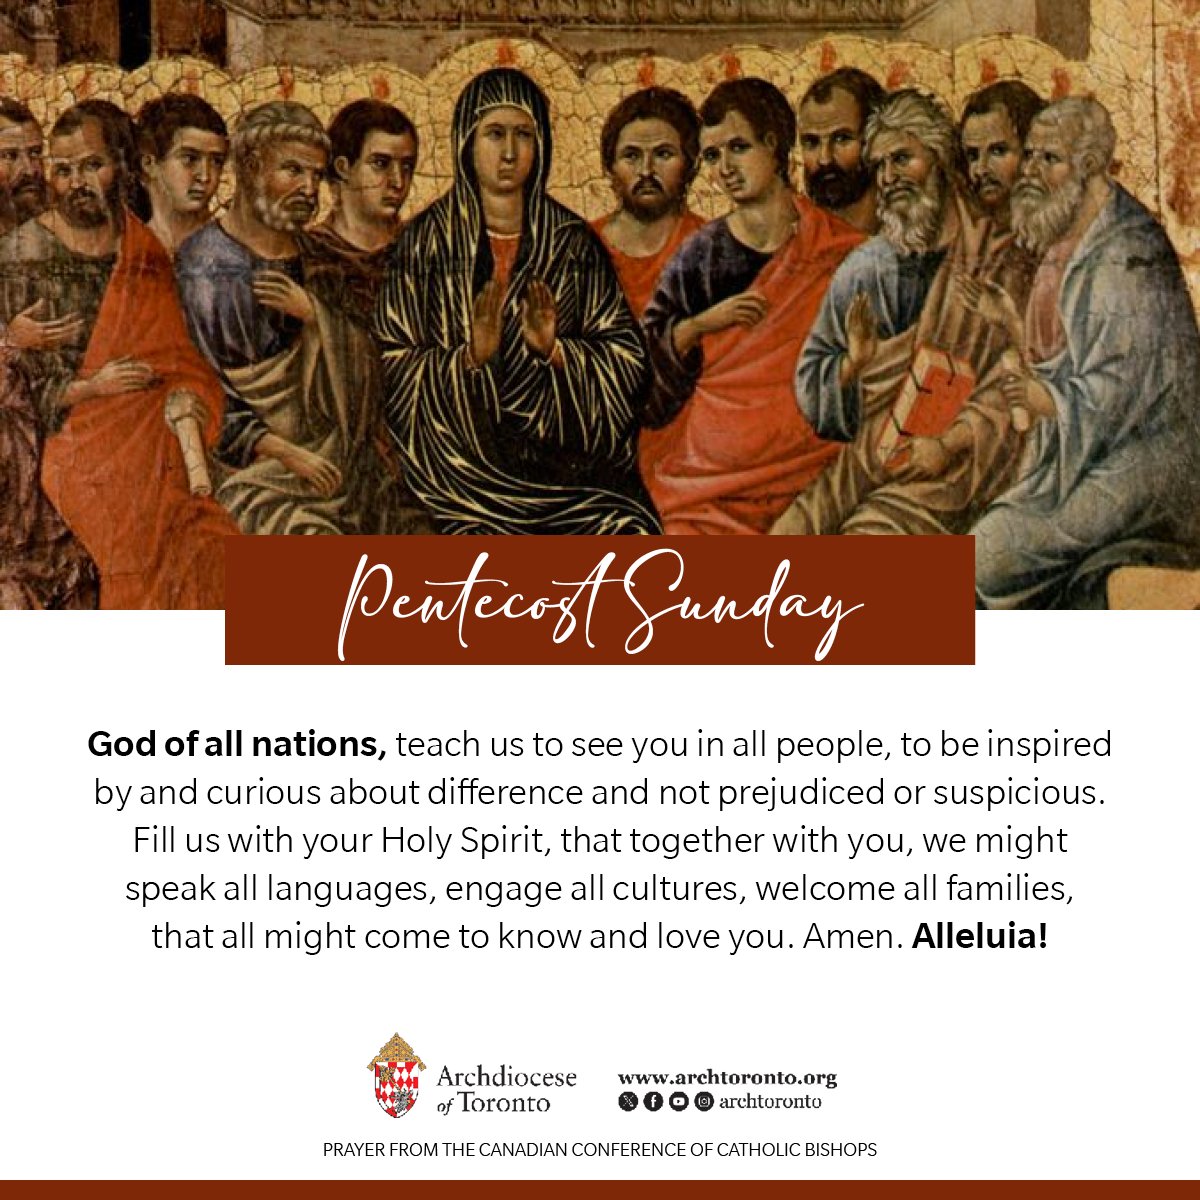 God of all nations, teach us to see you in all people, to be inspired by and curious about difference and not prejudiced or suspicious. Fill us with your Holy Spirit, that all might come to know and love you. Amen. Alleluia! @CCCB_CECC #Pentecost